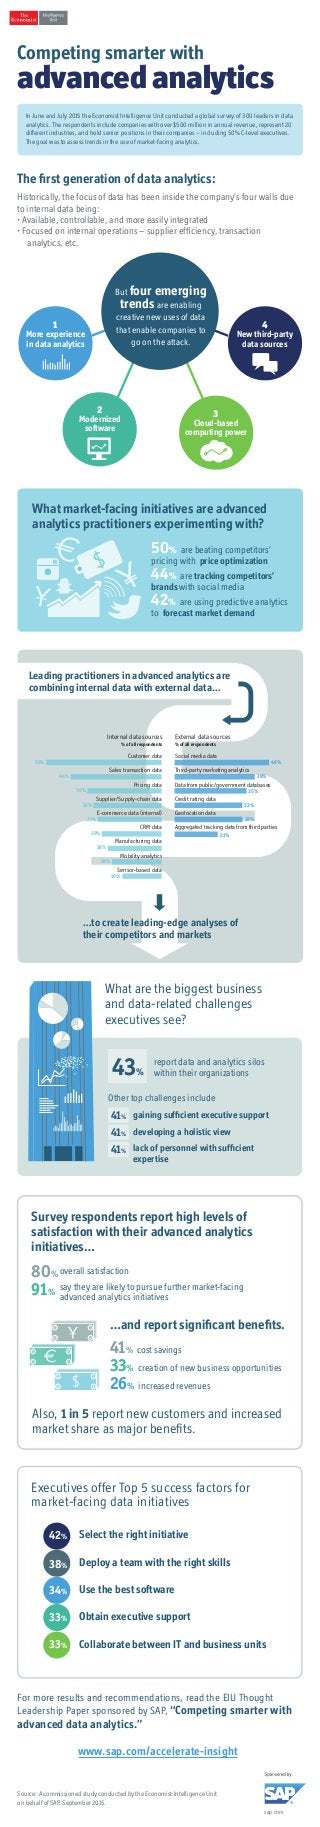 sap.com
What are the biggest business
and data-related challenges
executives see?
Executives offer Top 5 success factors for
market-facing data initiatives
report data and analytics silos
within their organizations
Leading practitioners in advanced analytics are
combining internal data with external data…
External data sources
% of all respondents
Social media data
Third-party marketing analytics
Data from public/government databases
Credit rating data
Geolocation data
Aggregated tracking data from third parties
46%
39%
35%
33%
33%
21%
Internal data sources
% of all respondents
Customer data
Sales transaction data
Pricing data
Supplier/Supply-chain data
E-commerce data (internal)
CRM data
Manufacturing data
Mobility analytics
Sensor-based data
56%
44%
36%
33%
31%
29%
26%
24%
19%
…to create leading-edge analyses of
their competitors and markets
Source: A commissioned study conducted by the Economist Intelligence Unit
on behalf of SAP, September 2015.
For more results and recommendations, read the EIU Thought
Leadership Paper sponsored by SAP, “Competing smarter with
advanced data analytics.”
Competing smarter with
advanced analytics
In June and July 2015 the Economist Intelligence Unit conducted a global survey of 300 leaders in data
analytics. The respondents include companies with over $500 million in annual revenue, represent 20
different industries, and hold senior positions in their companies – including 50% C-level executives.
The goal was to assess trends in the use of market-facing analytics.
The first generation of data analytics:
Historically, the focus of data has been inside the company’s four walls due
to internal data being:
• Available, controllable, and more easily integrated
• Focused on internal operations – supplier efficiency, transaction
analytics, etc.
2
Modernized
software
1
More experience
in data analytics
4
New third-party
data sources
But four emerging
trends are enabling
creative new uses of data
that enable companies to
go on the attack.
3
Cloud-based
computing power
What market-facing initiatives are advanced
analytics practitioners experimenting with?
50% are beating competitors’
pricing with price optimization
44% are tracking competitors’
brands with social media
42% are using predictive analytics
to forecast market demand
…and report significant benefits.
Survey respondents report high levels of
satisfaction with their advanced analytics
initiatives…
Also, 1 in 5 report new customers and increased
market share as major benefits.
80%
91%
overall satisfaction
say they are likely to pursue further market-facing
advanced analytics initiatives
41% cost savings
33% creation of new business opportunities
26% increased revenues
Select the right initiative
Deploy a team with the right skills
Use the best software
Obtain executive support
Collaborate between IT and business units
42%
38%
34%
33%
33%
43%
Other top challenges include
gaining sufficient executive support
developing a holistic view
lack of personnel with sufficient
expertise
41%
41%
41%
www.sap.com/accelerate-insight
 